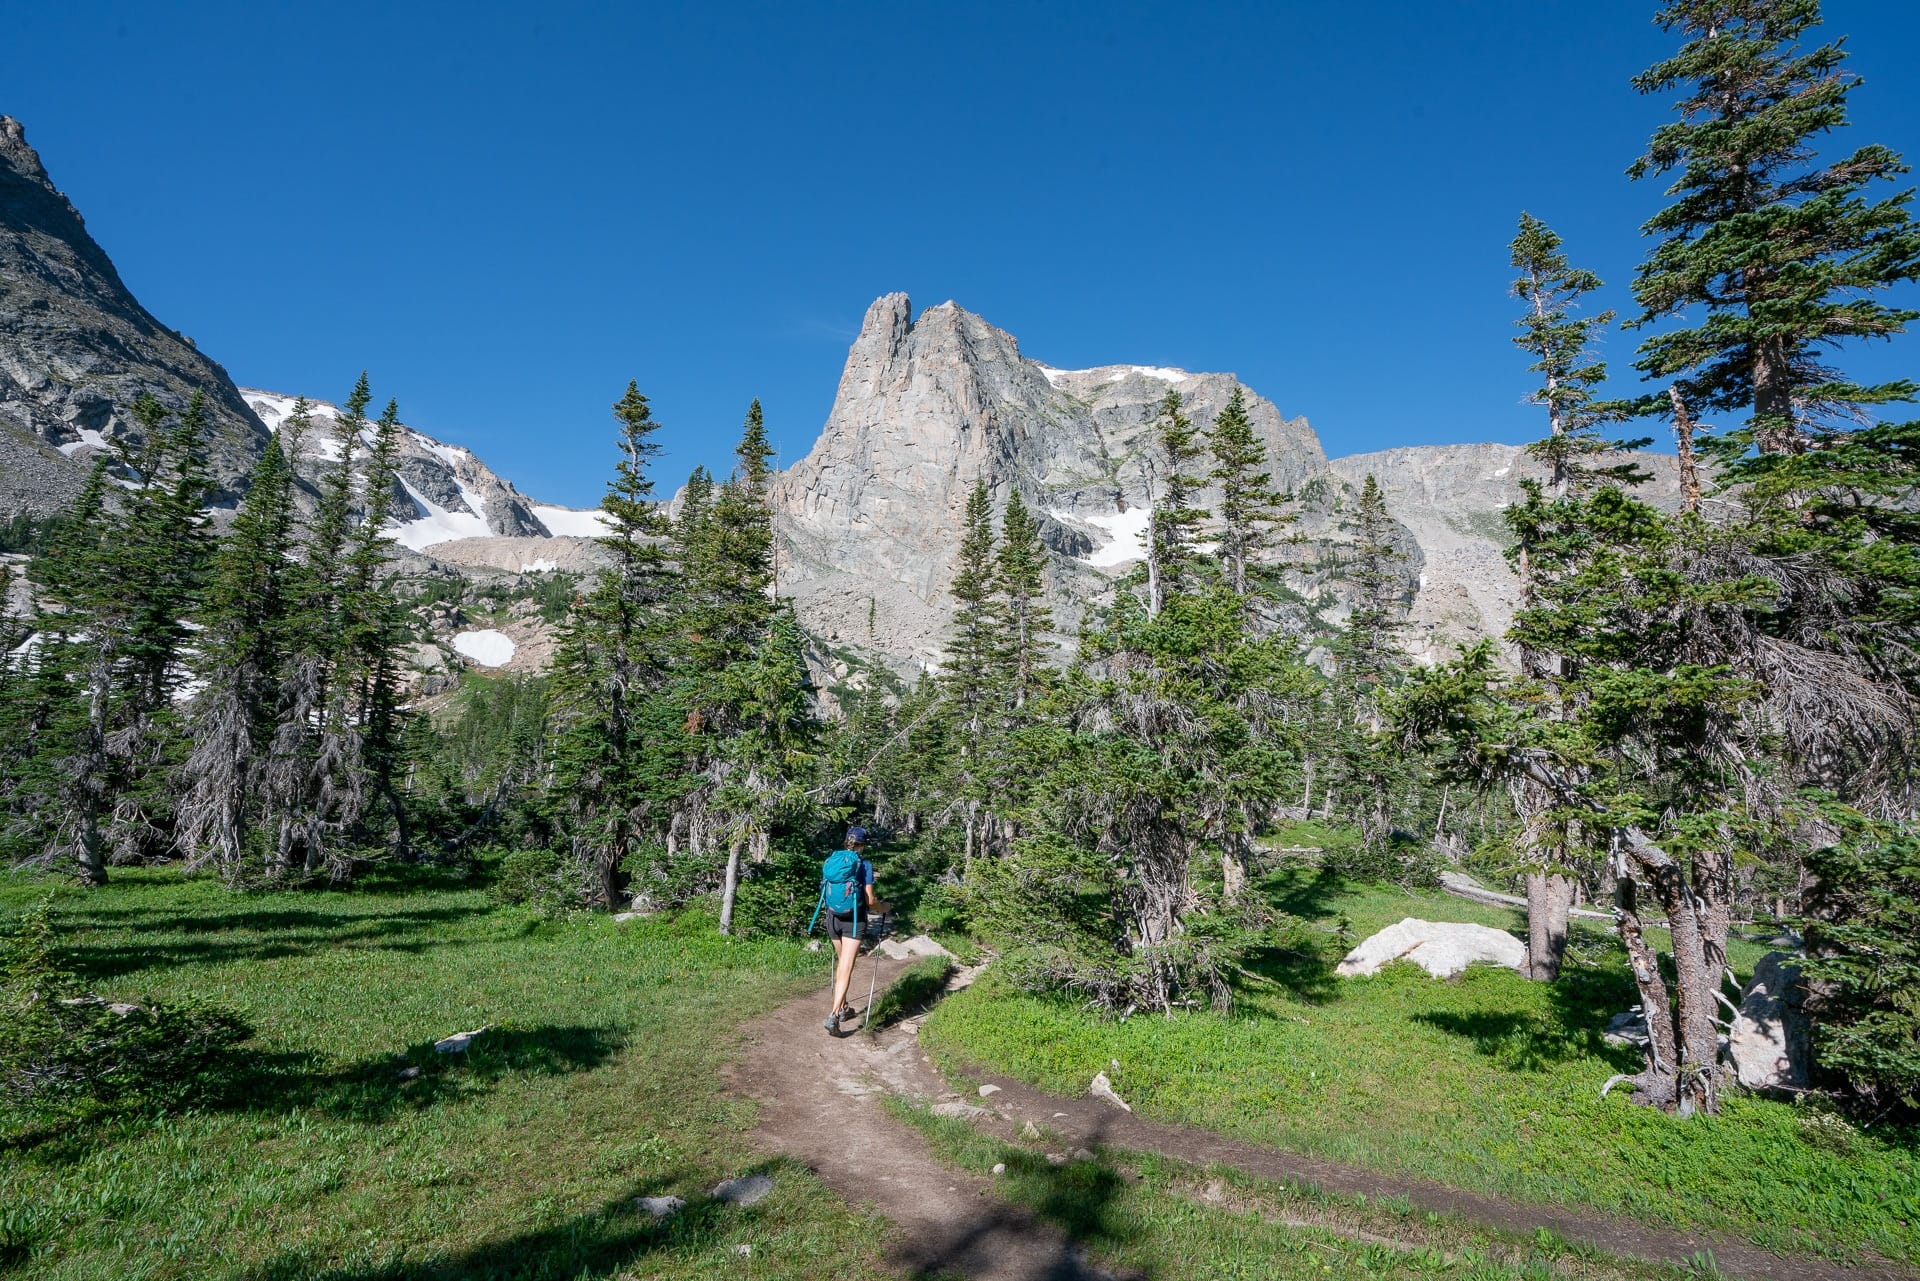 Lake Odessa Trail // Emerald Lake Trail // Get our guide to the best day hikes in Rocky Mountain National Park including distances, trail descriptions, what to be prepared for, and more.